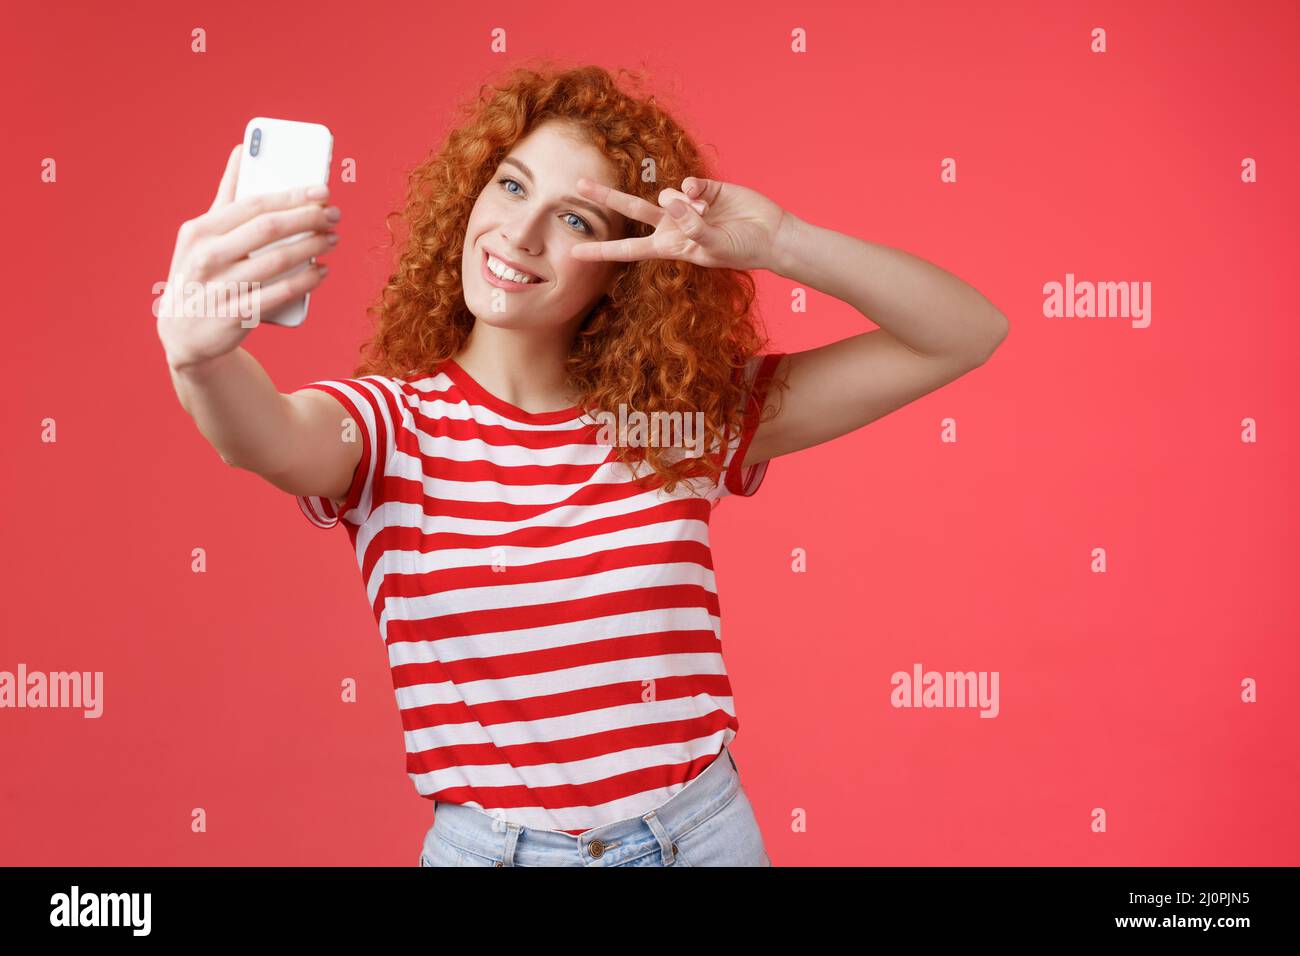 Hey followers how your summer holidays. Cheerful self-assured stylish fashionable redhead curly girl strike pose show peace vict Stock Photo